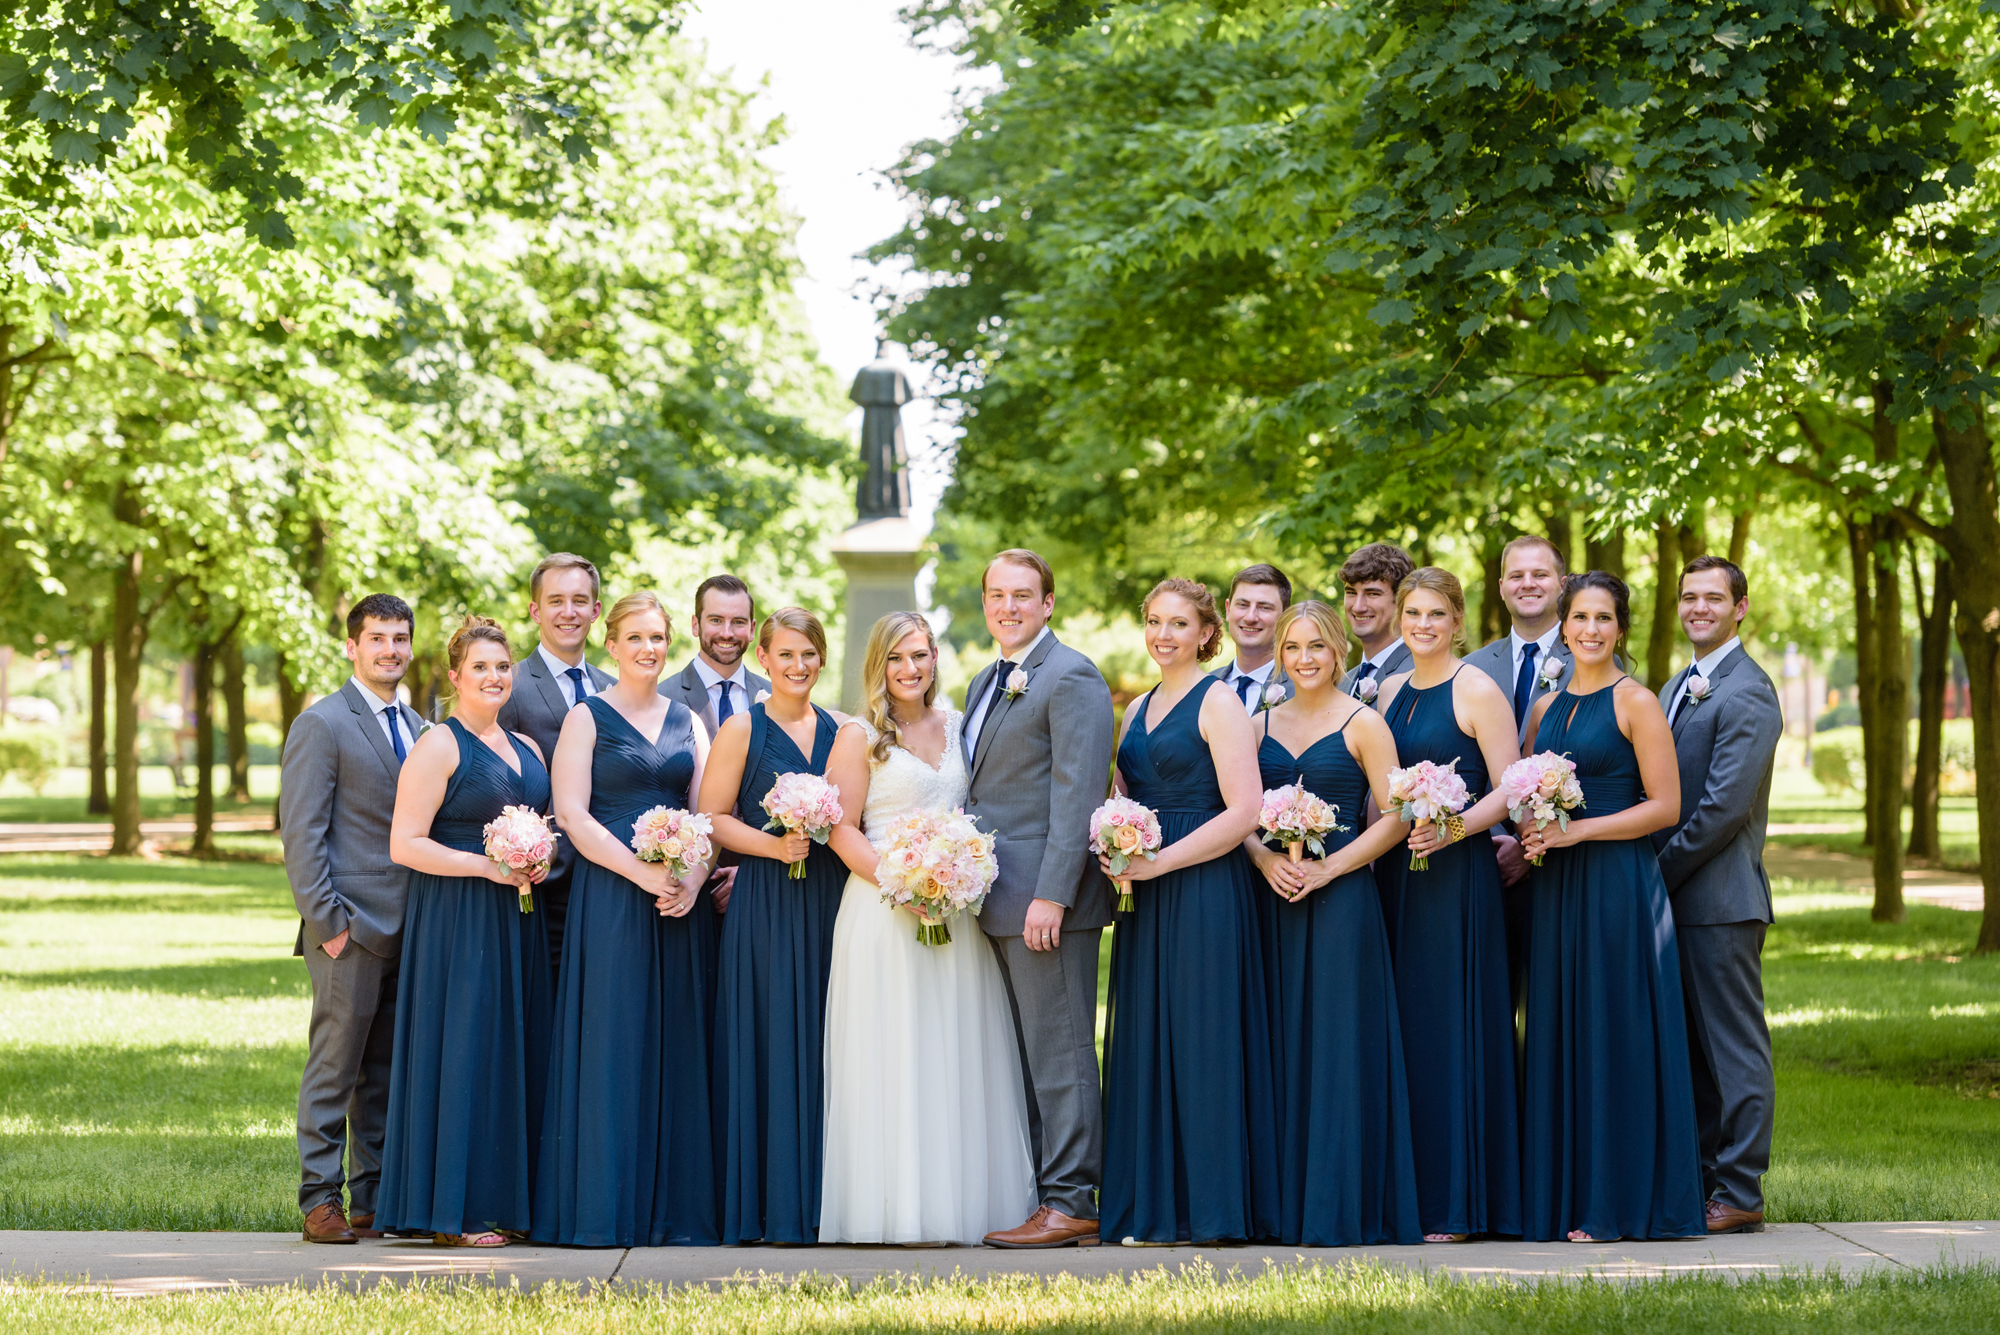 Bridal Party on God Quad after a wedding ceremony at the Basilica of the Sacred Heart on the campus of Notre Dame